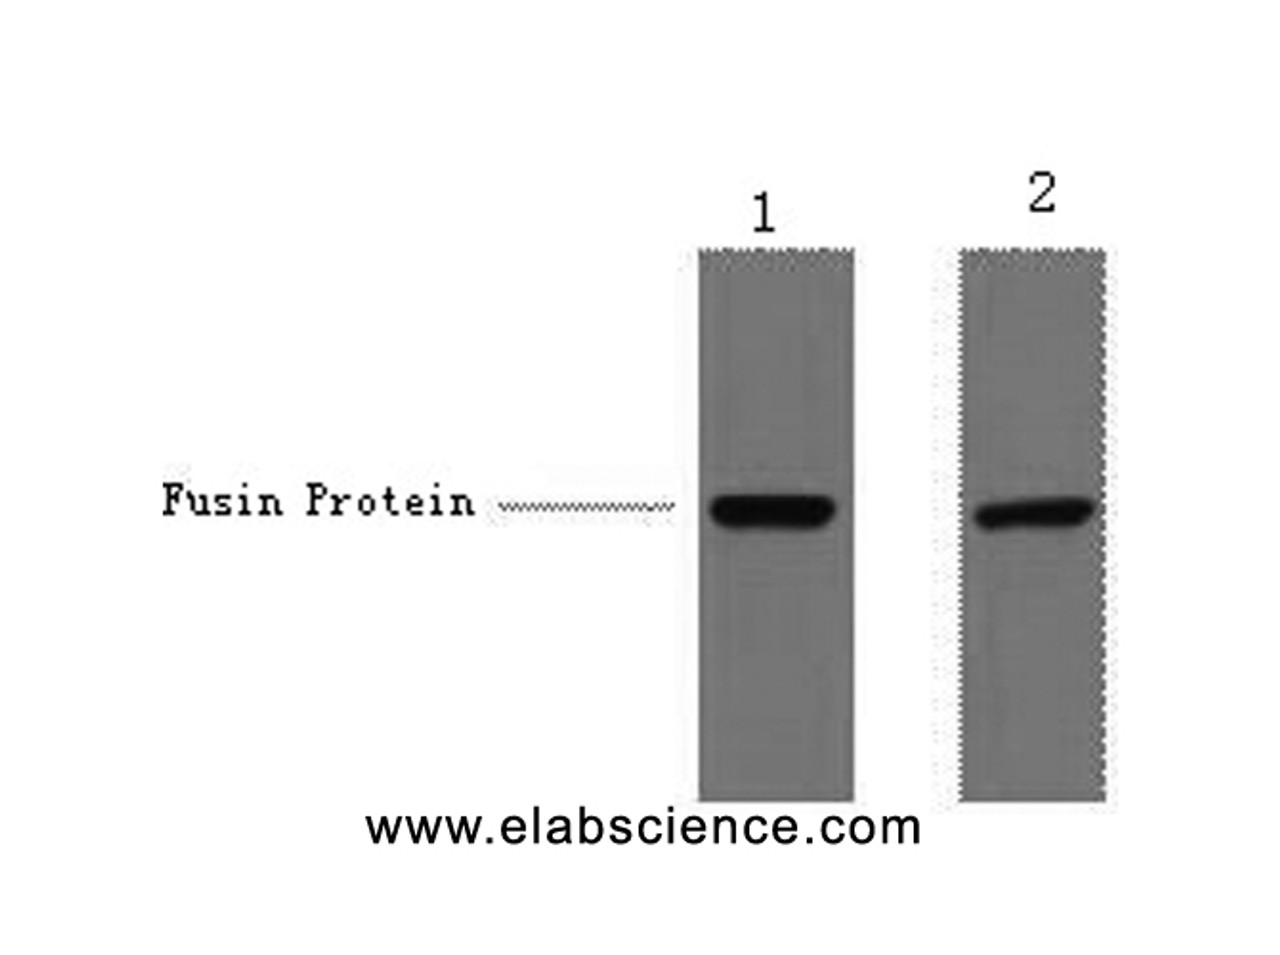 Western Blot analysis of 1ug V5 fusion protein using V5-Tag Monoclonal Antibody at dilution of 1) 1:5000 2) 1:10000.